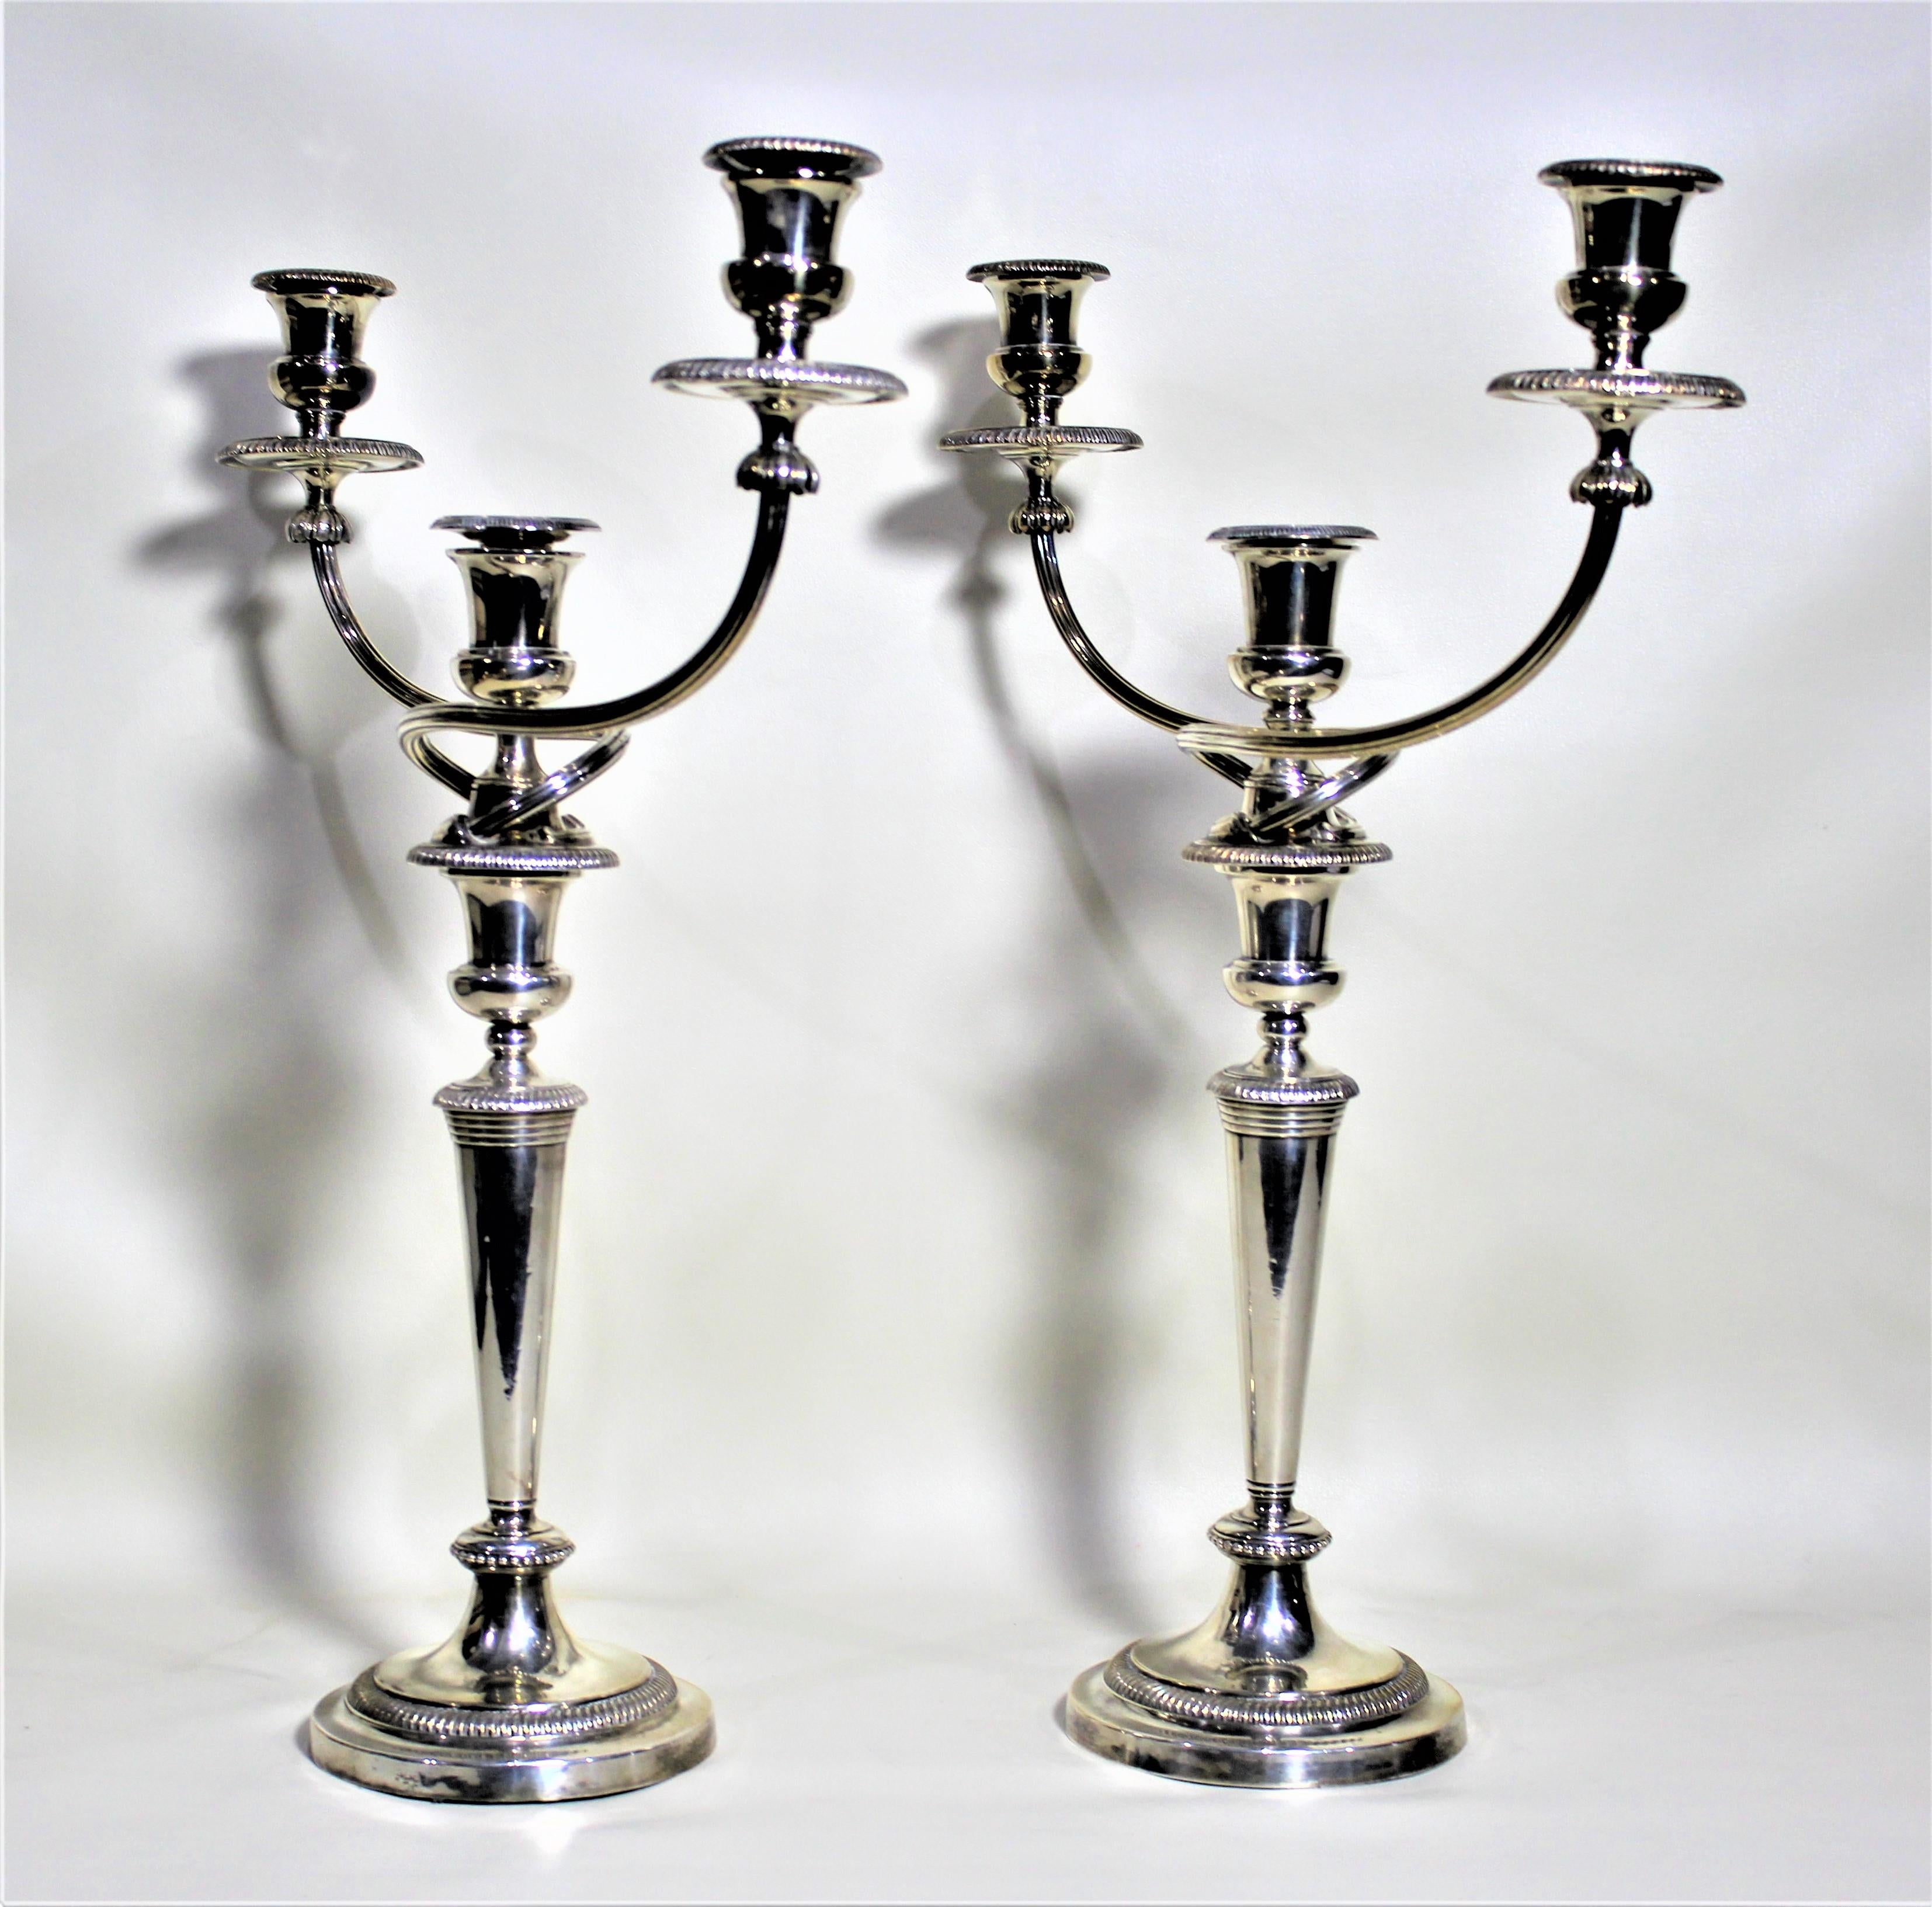 Cast Mathew Bolton Antique Sheffield Silver Plated 3 Branch Convertible Candelabras For Sale